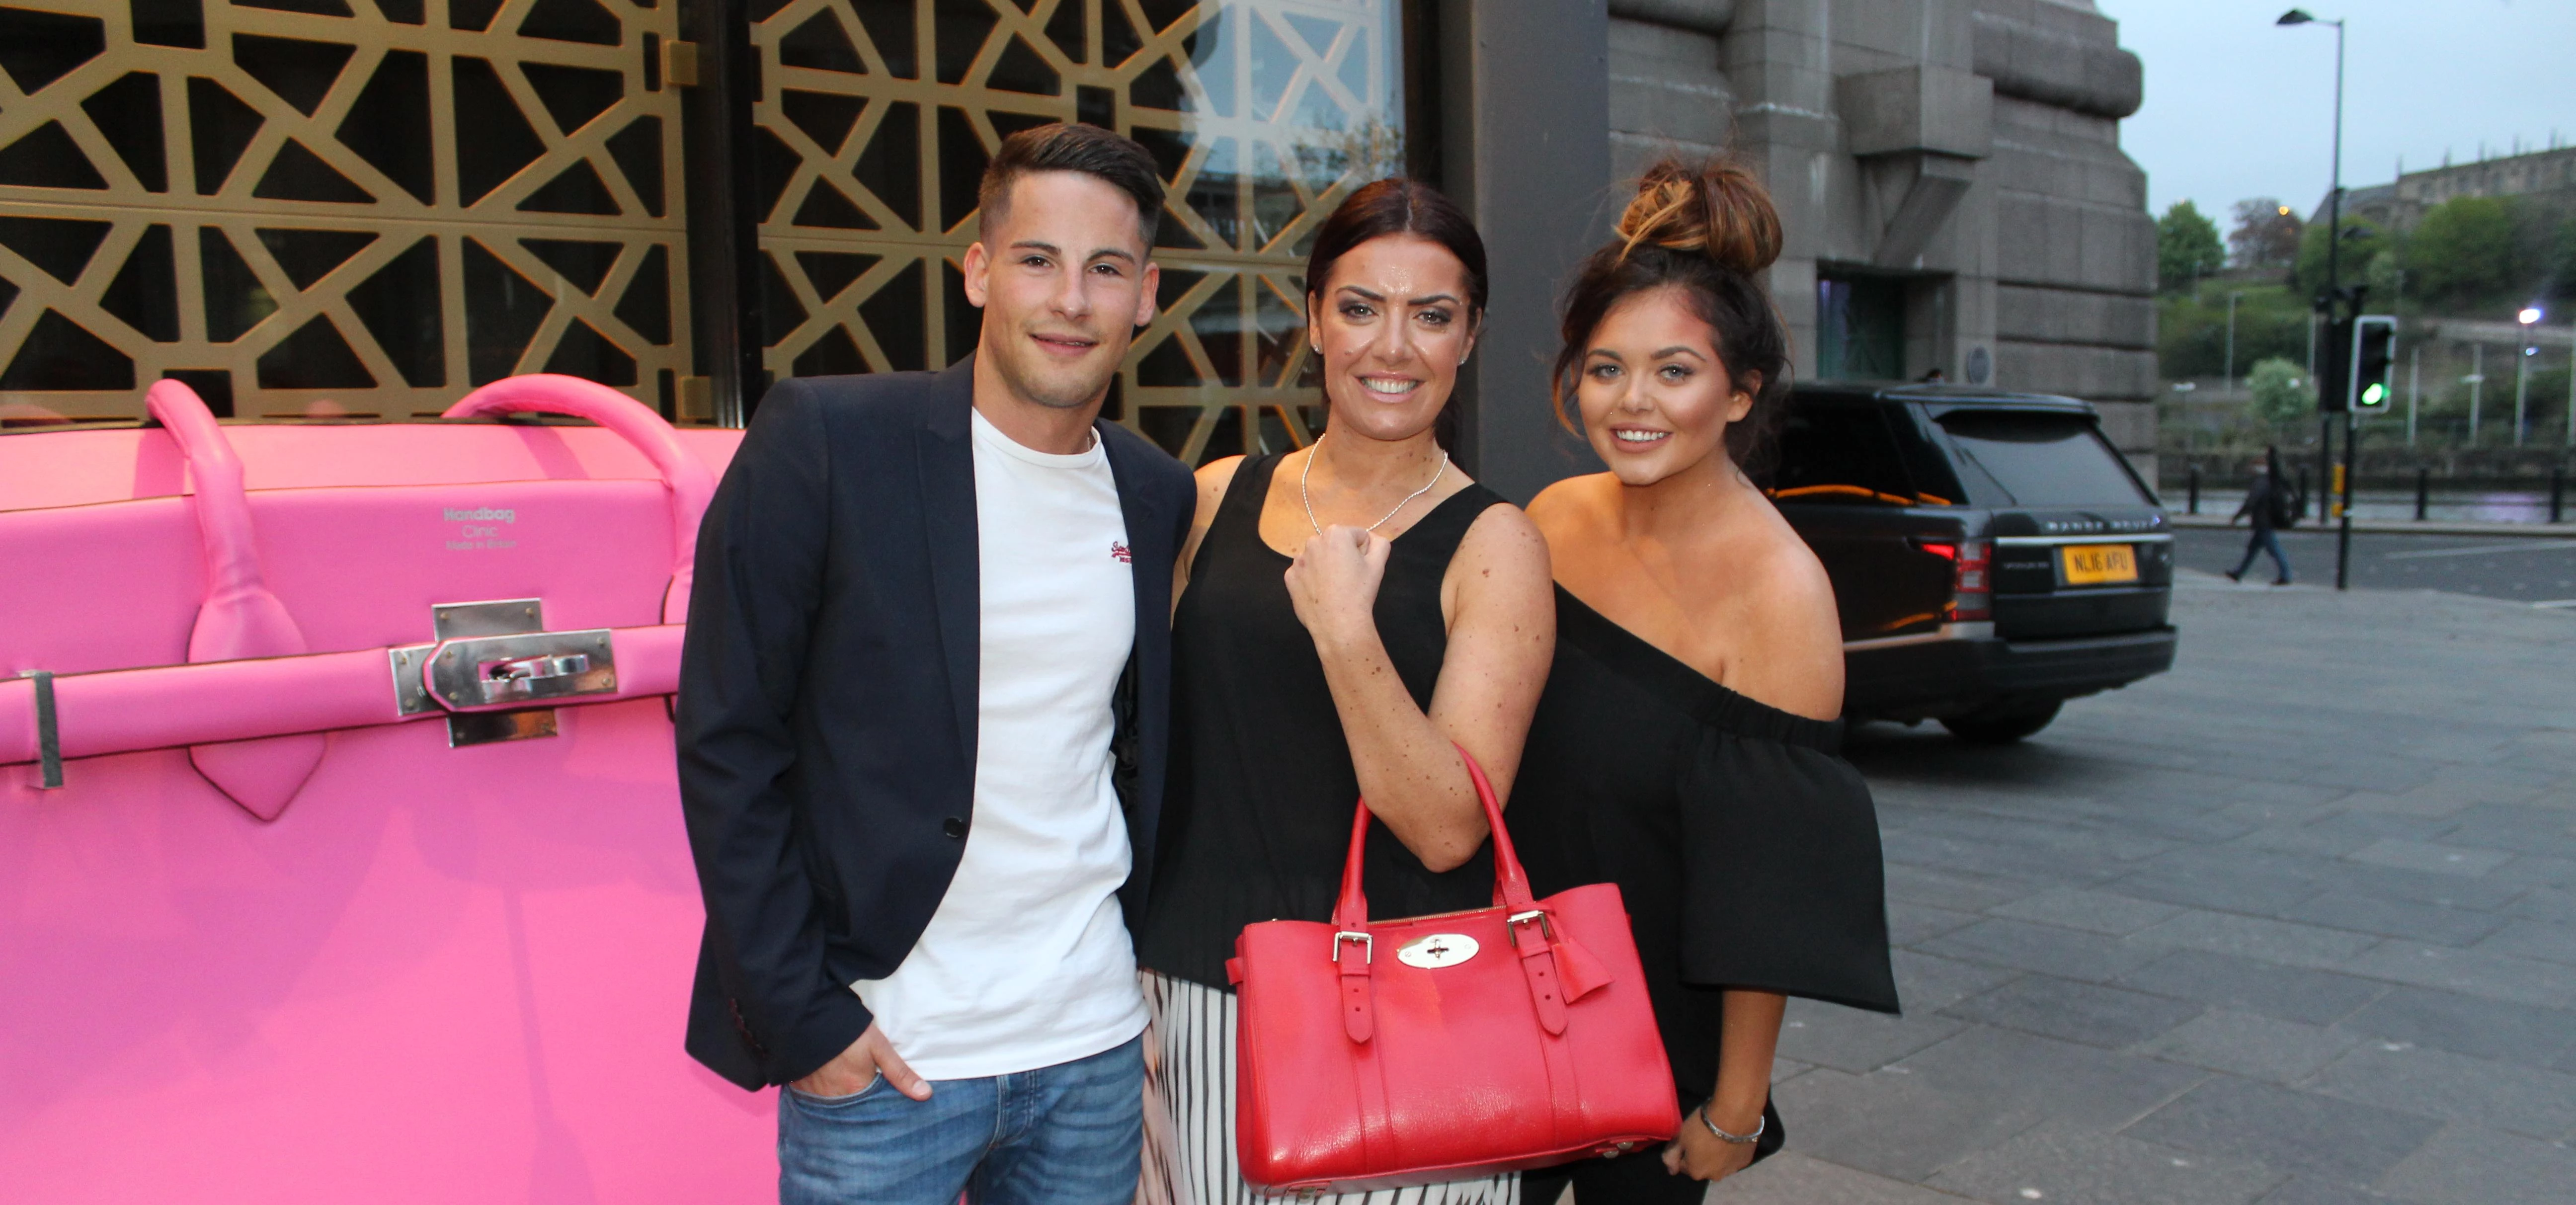 Capital FM presenters Martin Lowes (left) and Scarlett Moffatt (right) with Lisa Guthrie